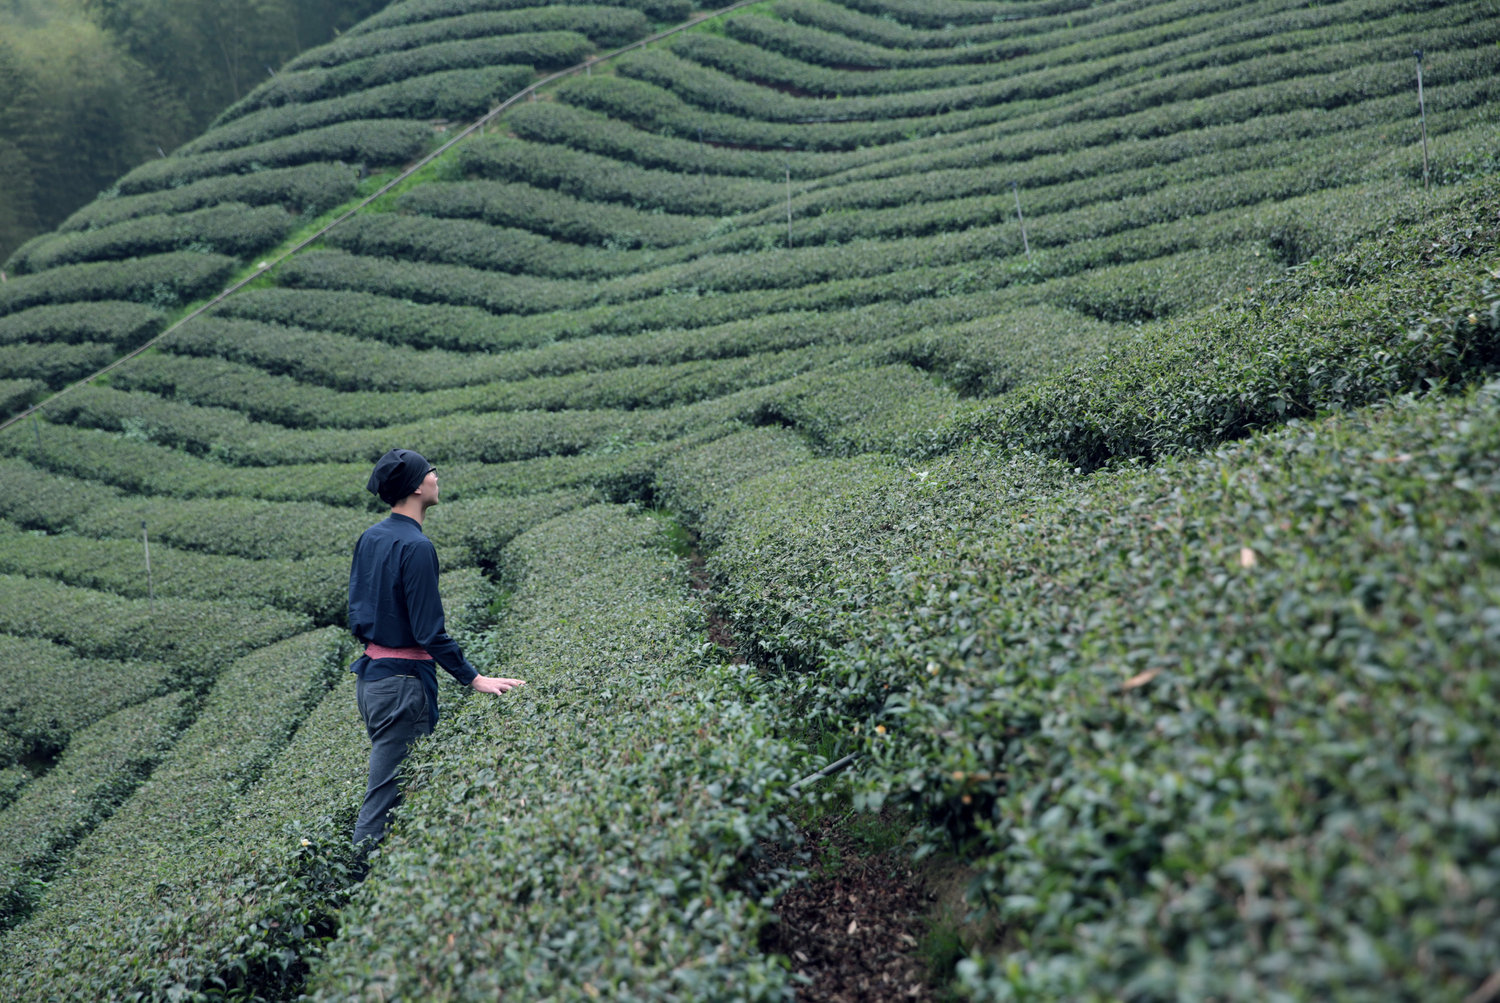 Charuma is the culmination of a year spent researching tea in Taiwan